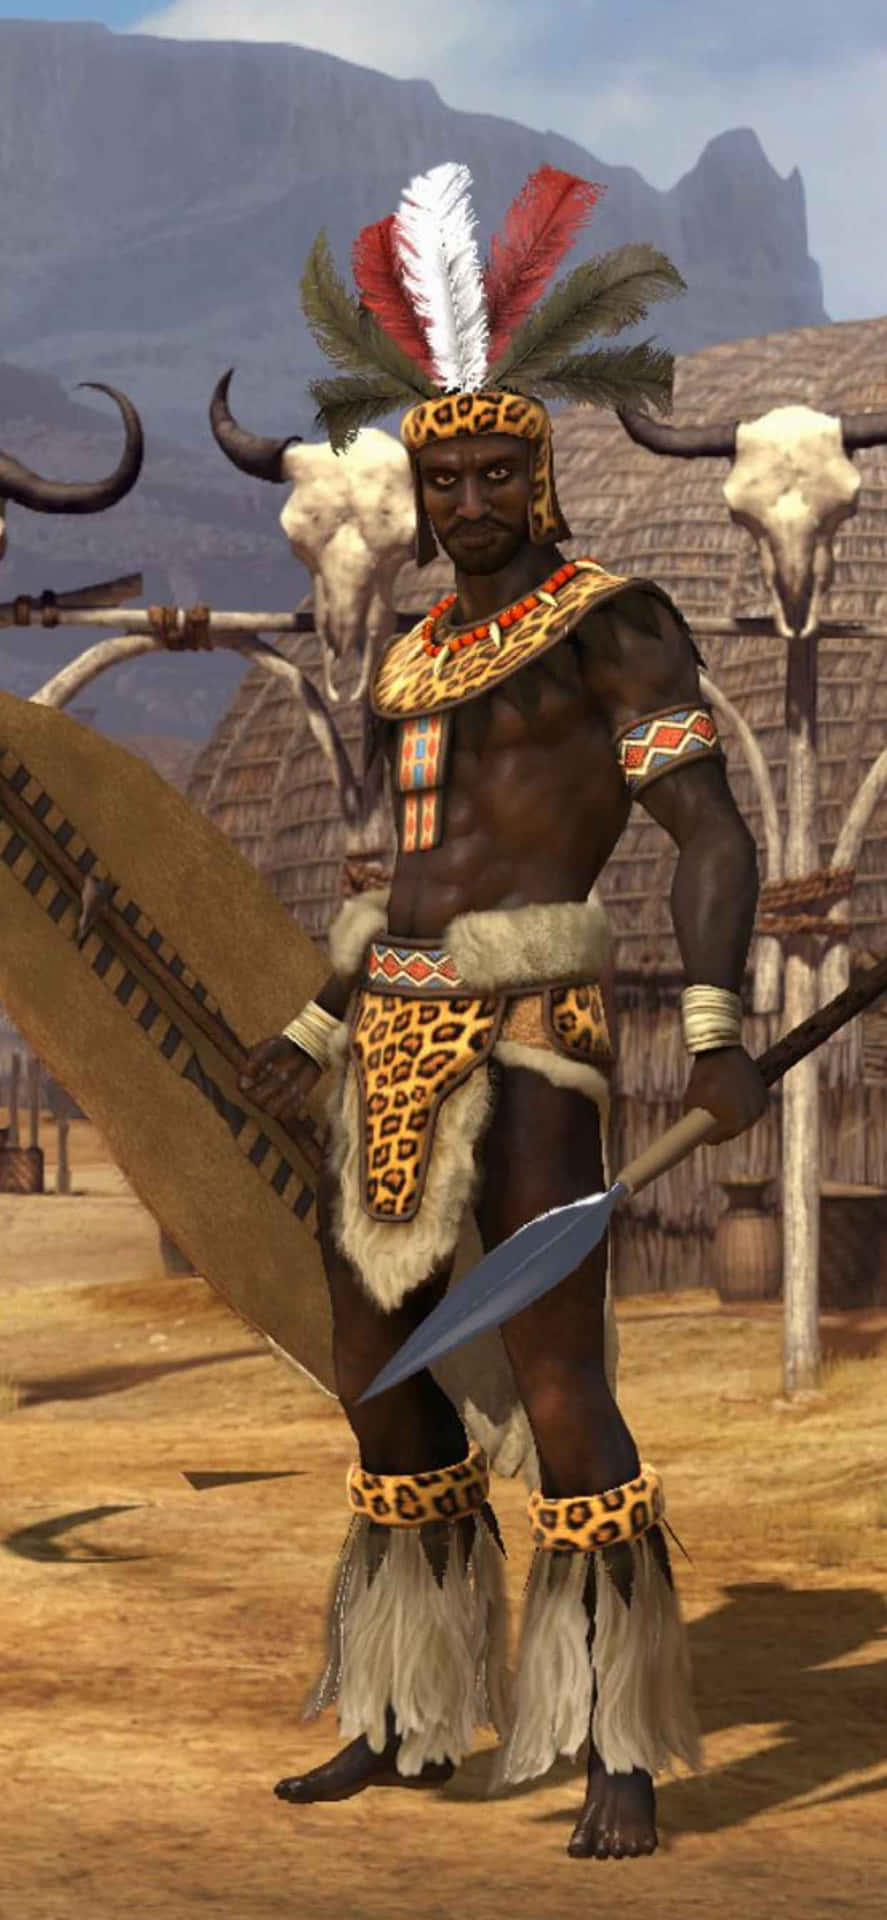 A Man In A Traditional Outfit With A Spear And A Sword